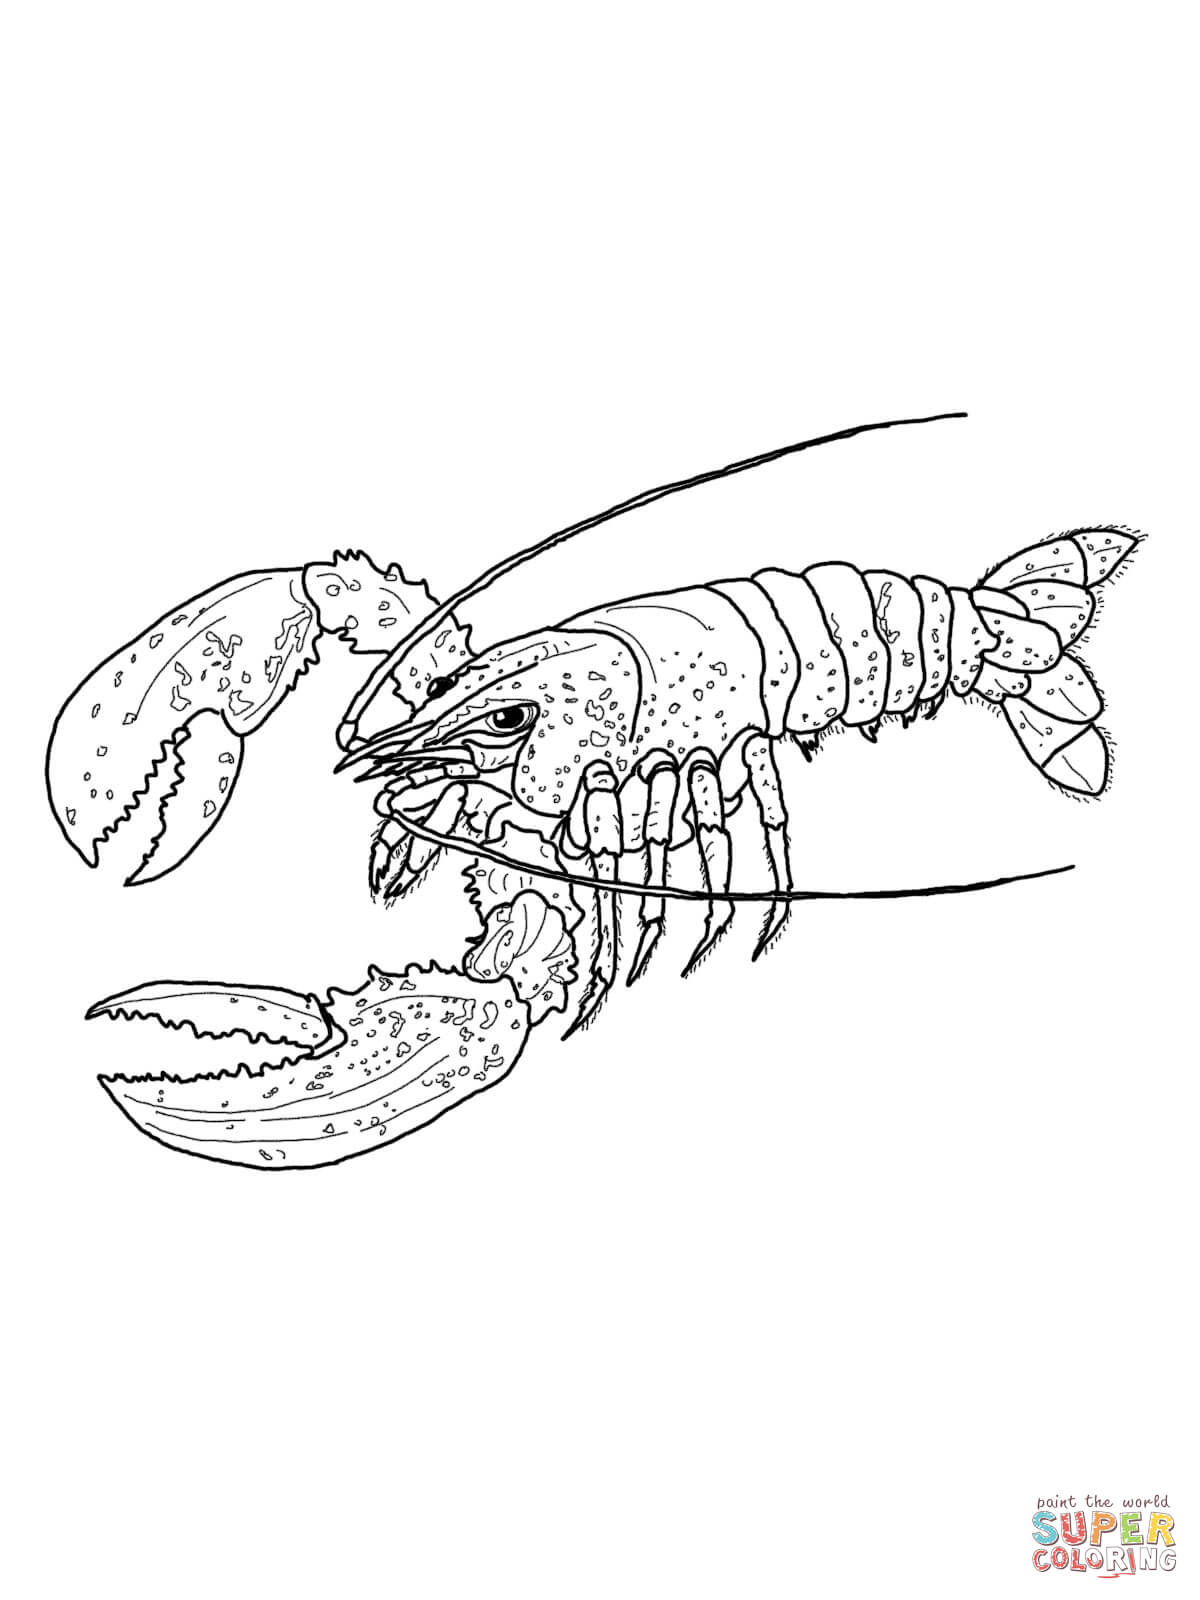 Spiny Lobster coloring #6, Download drawings